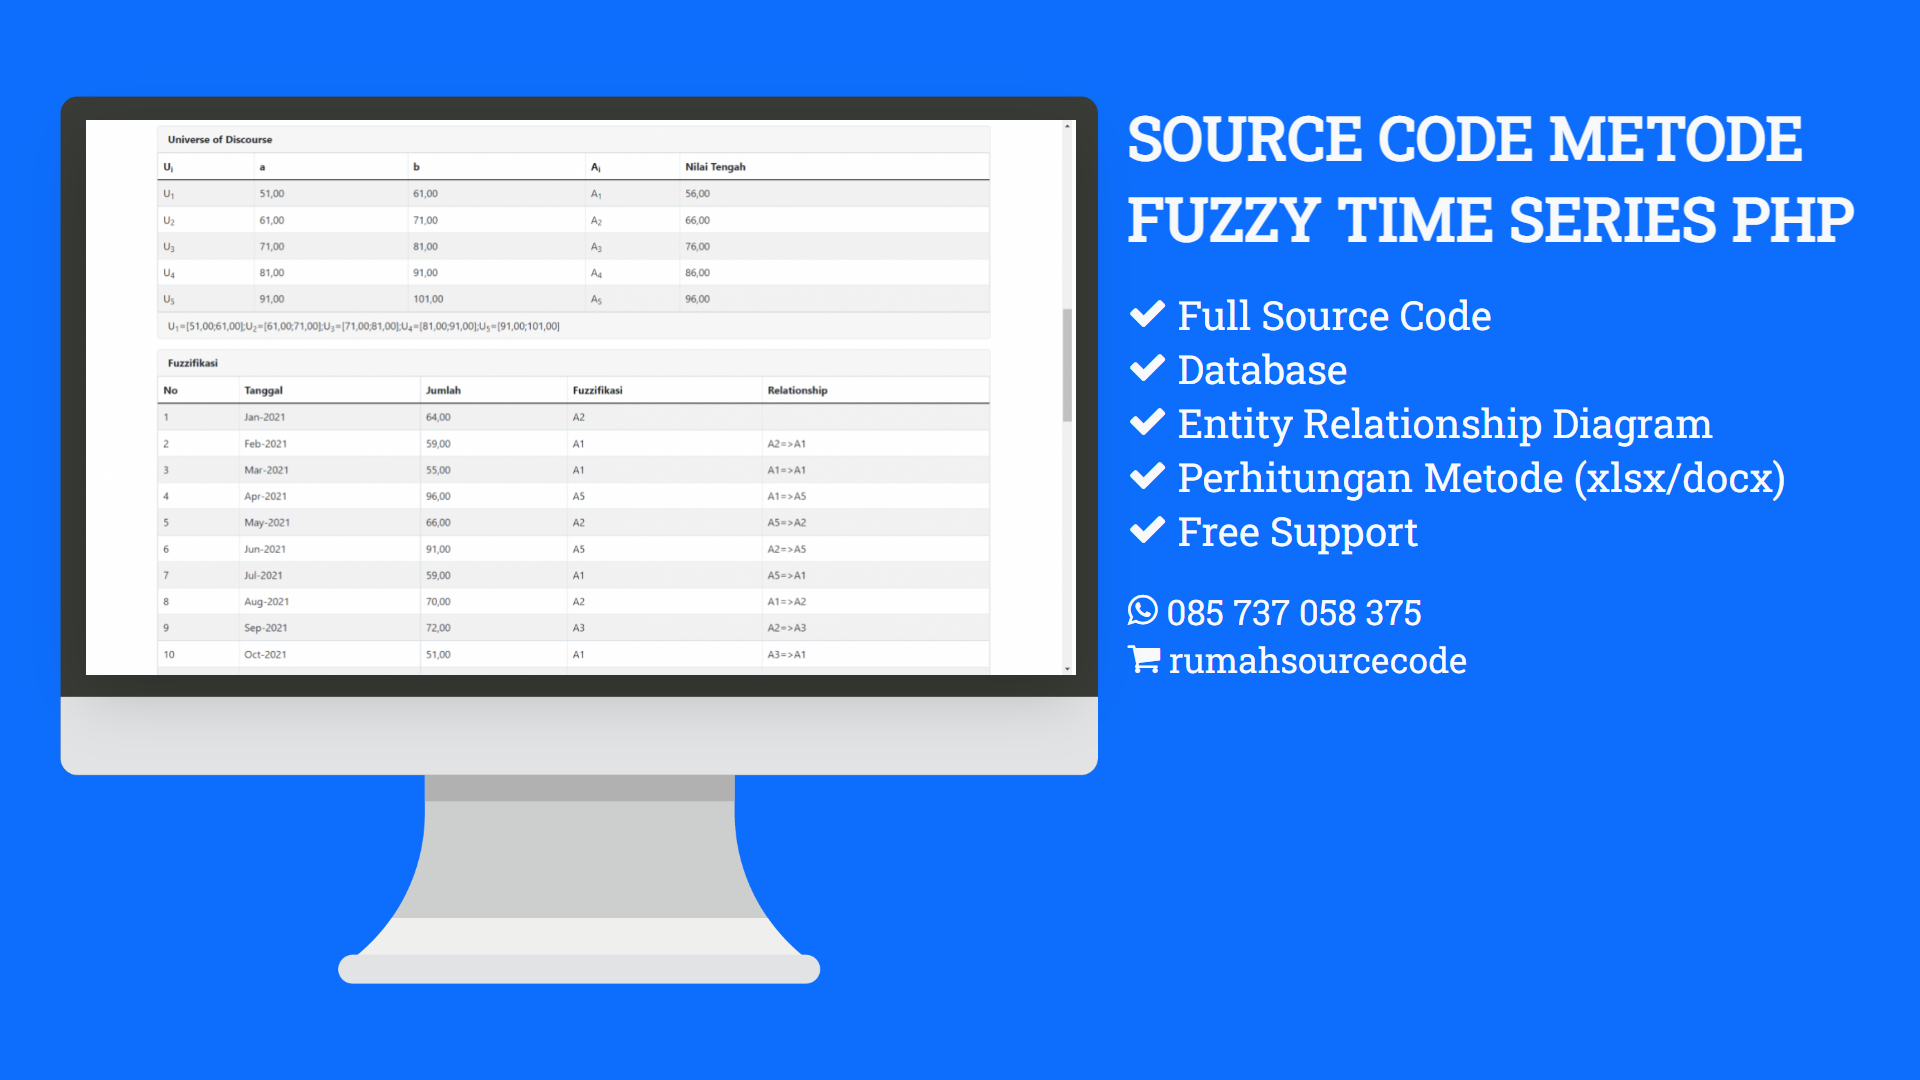 Source Code Metode Fuzzy Time Series PHP